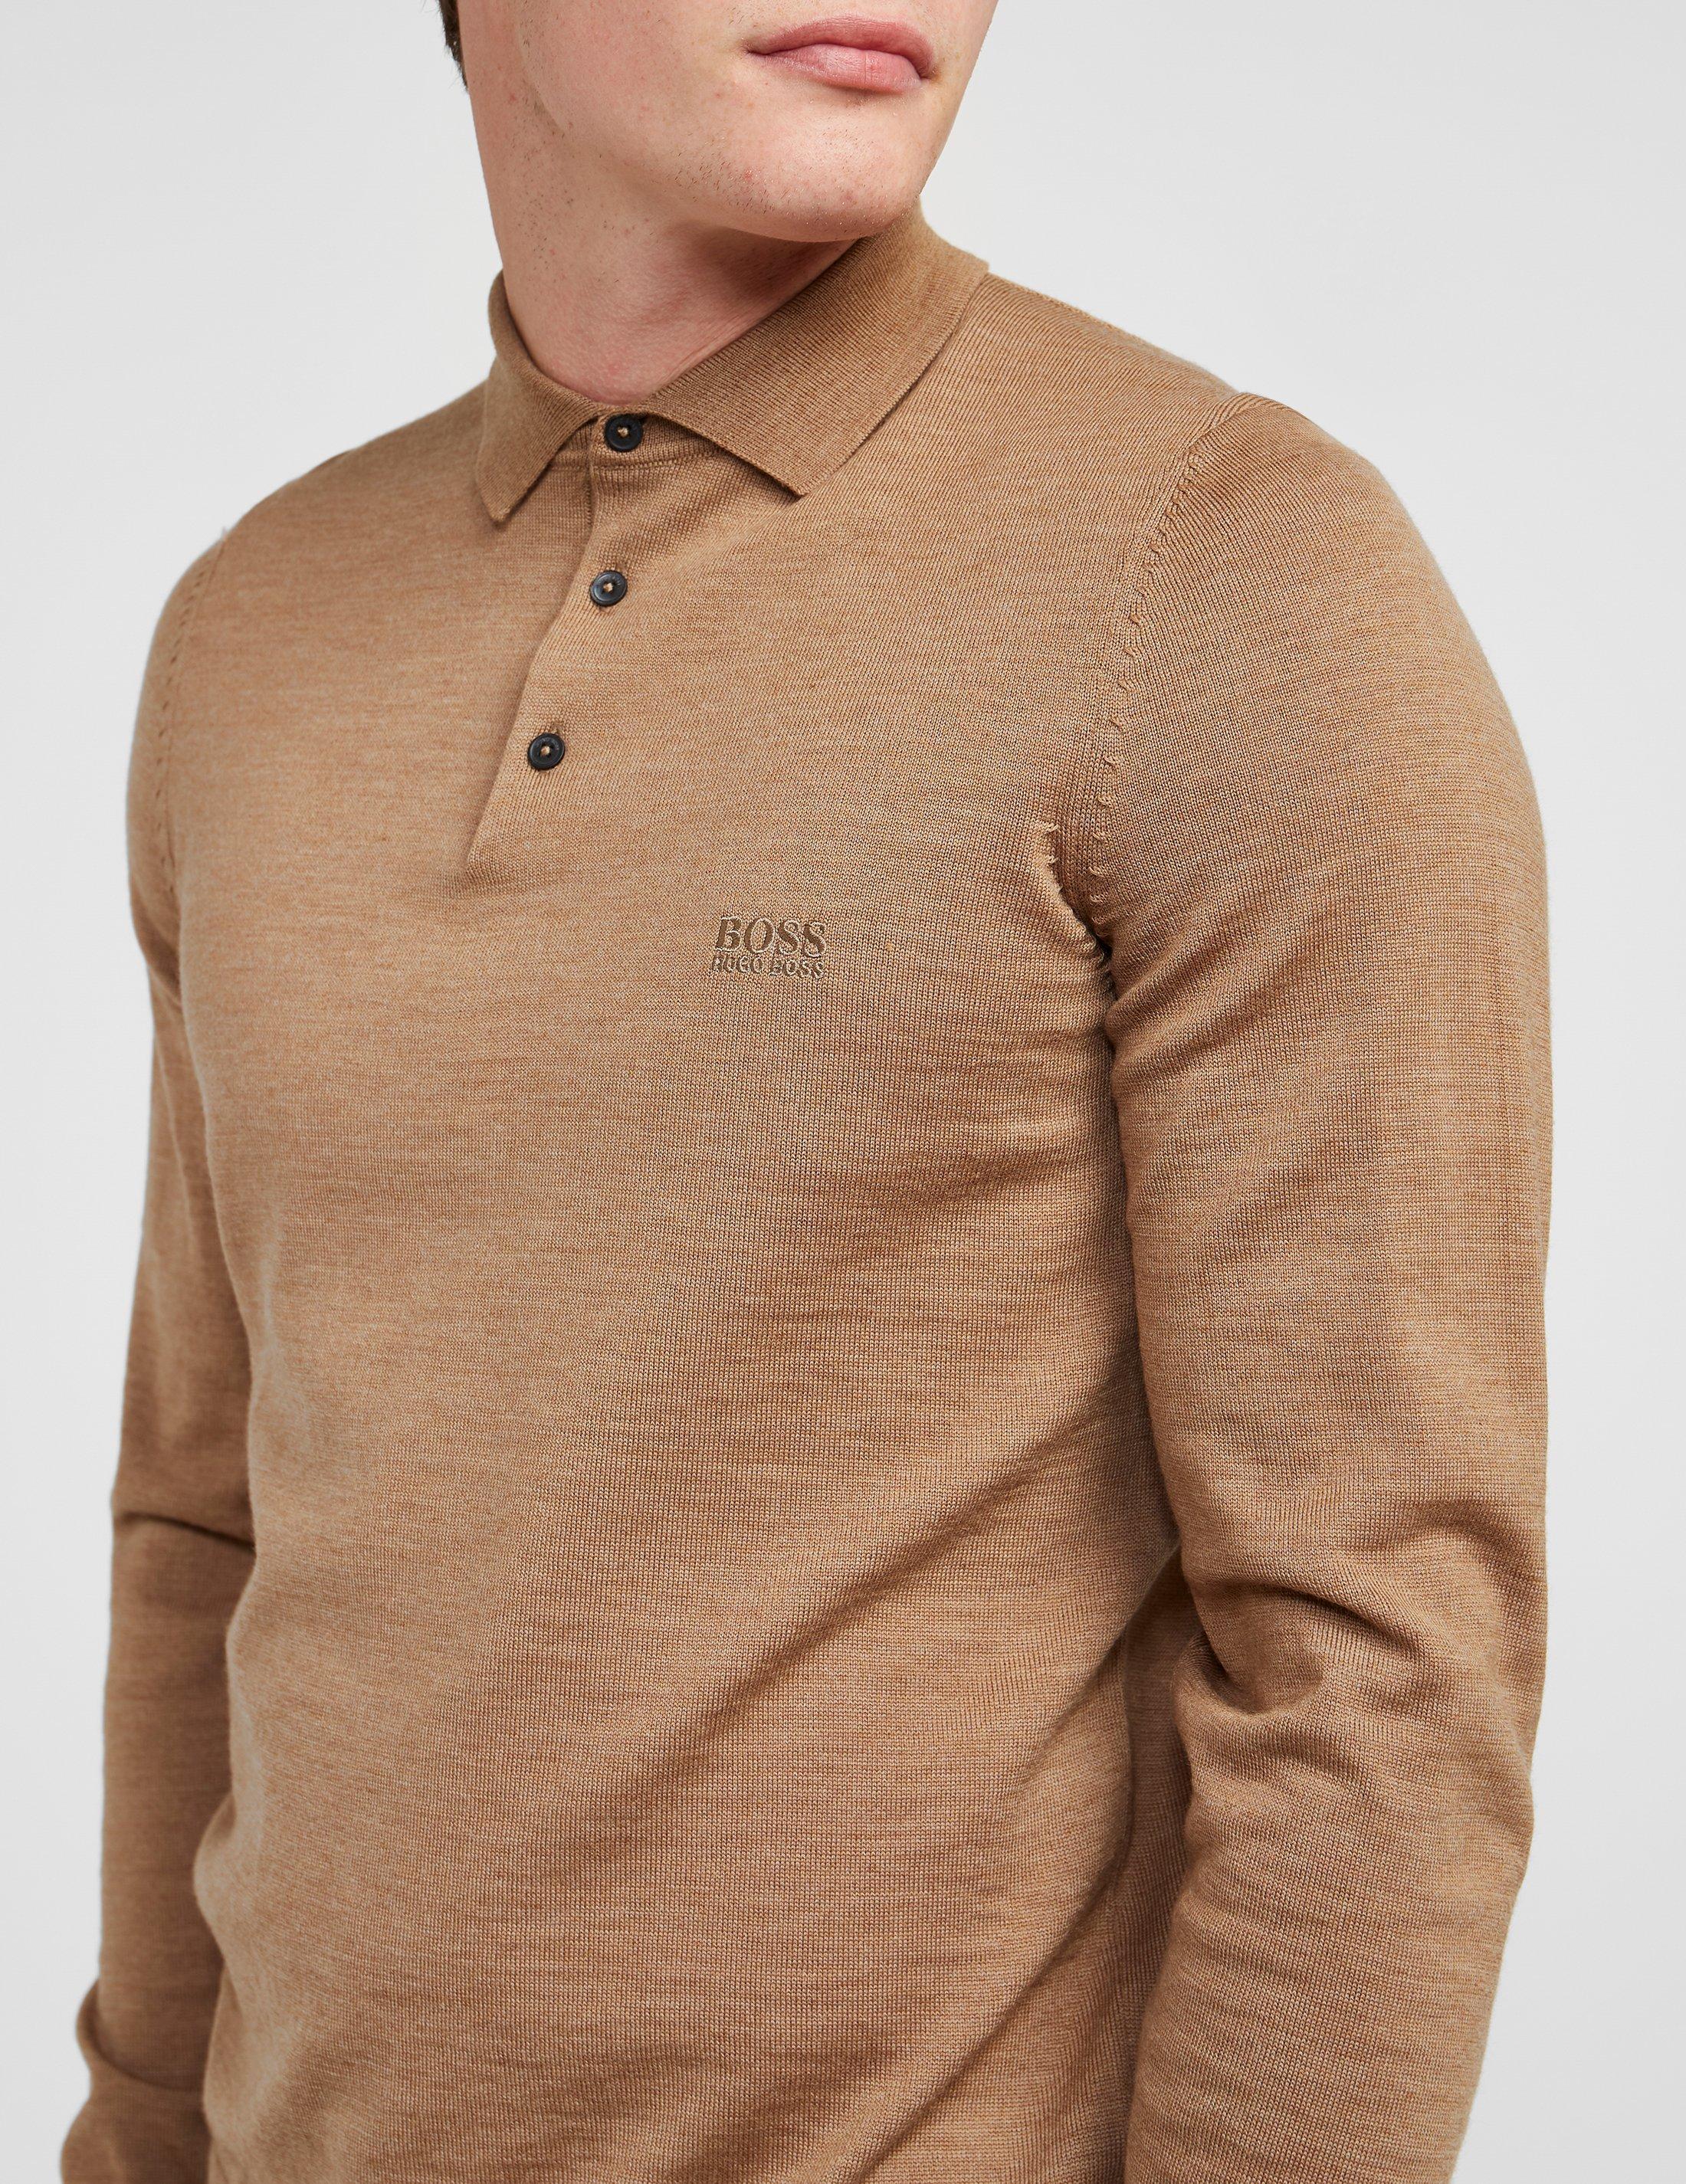 BOSS by HUGO BOSS Bono Long Sleeve Knitted Polo Shirt Beige/beige in  Natural for Men - Lyst